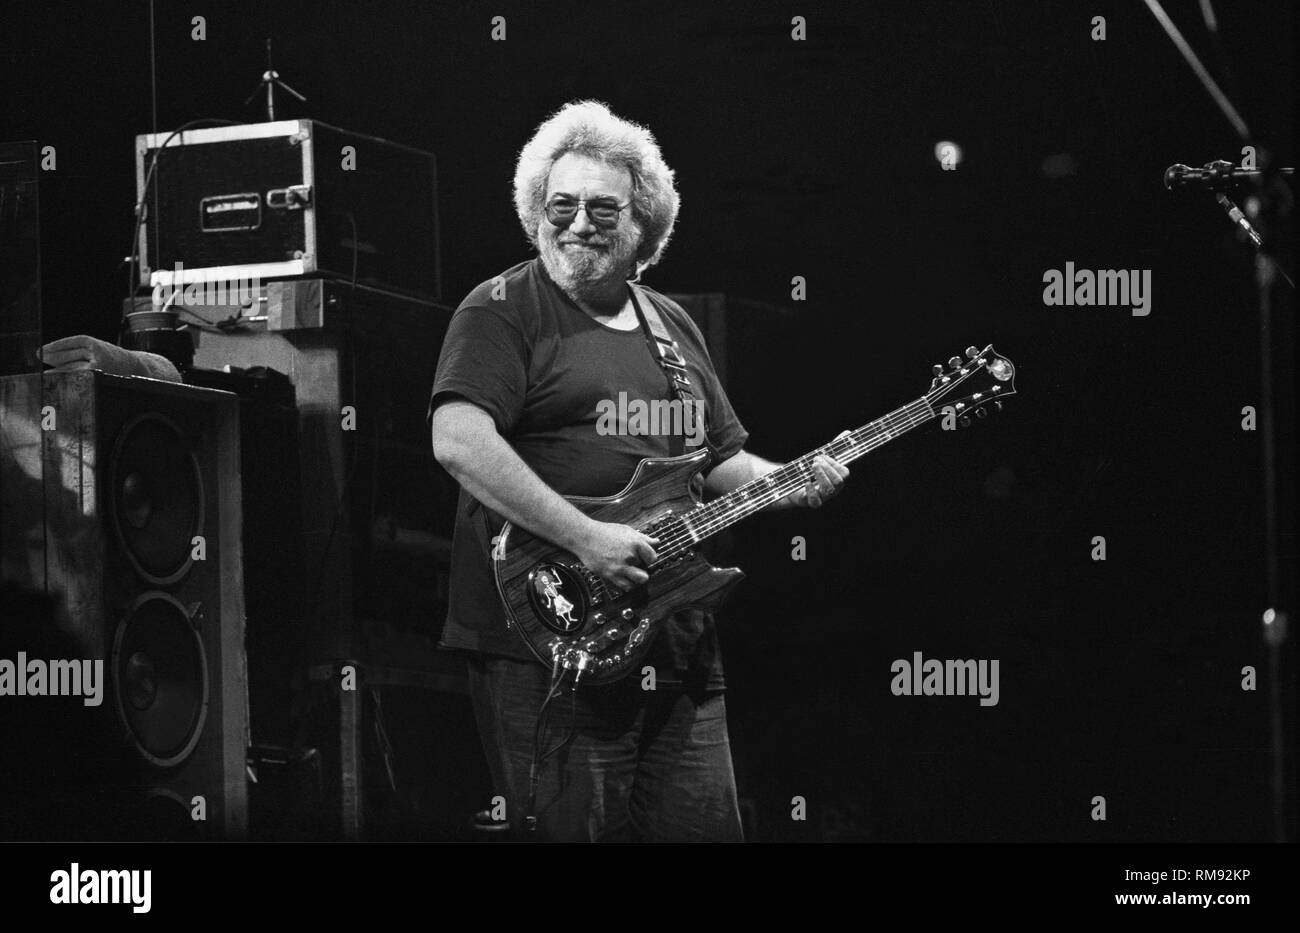 Singer, songwriter and guitarist Jerry Garcia is shown performing on stage during a Grateful Dead concert appearance. Stock Photo